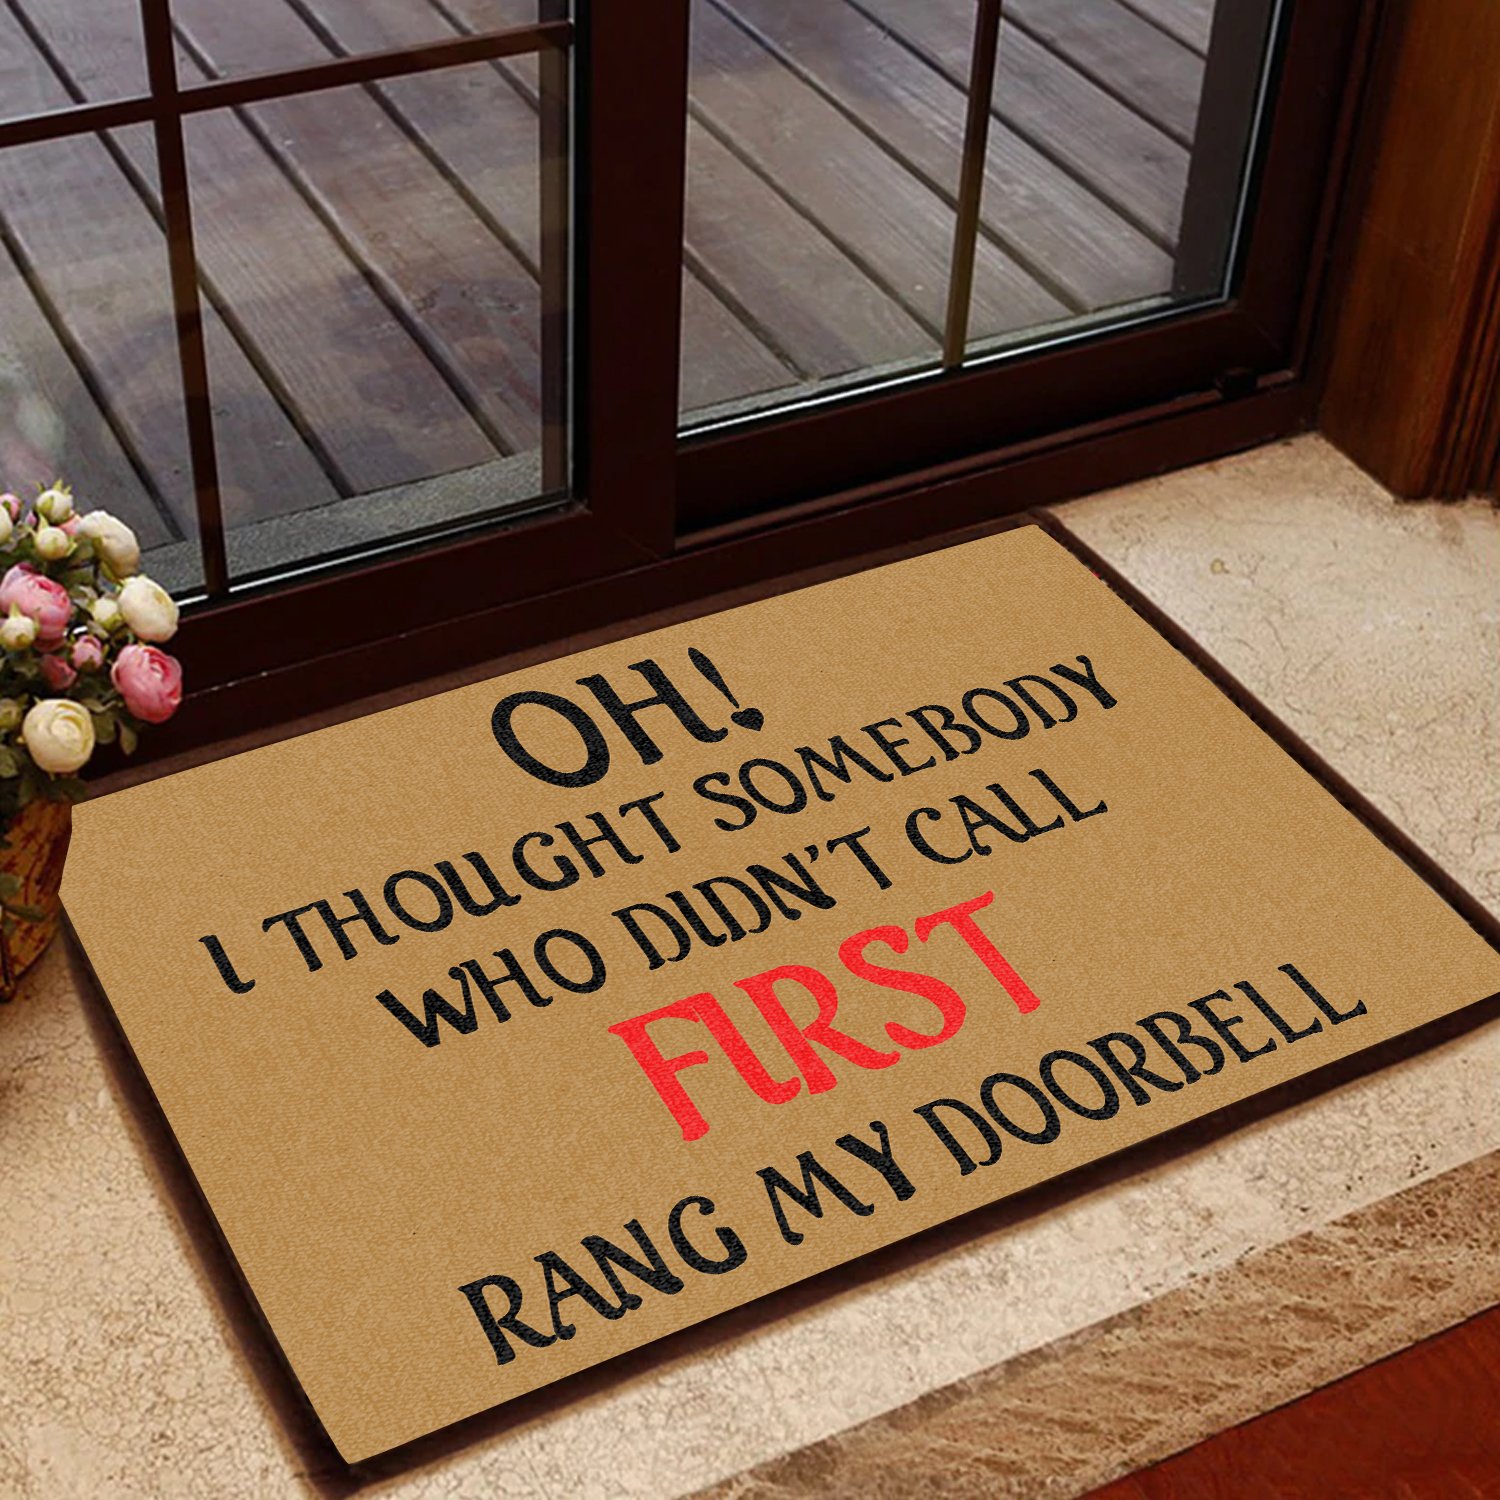 oh i thought somebody who didnt call first rang my doorbell doormat 2